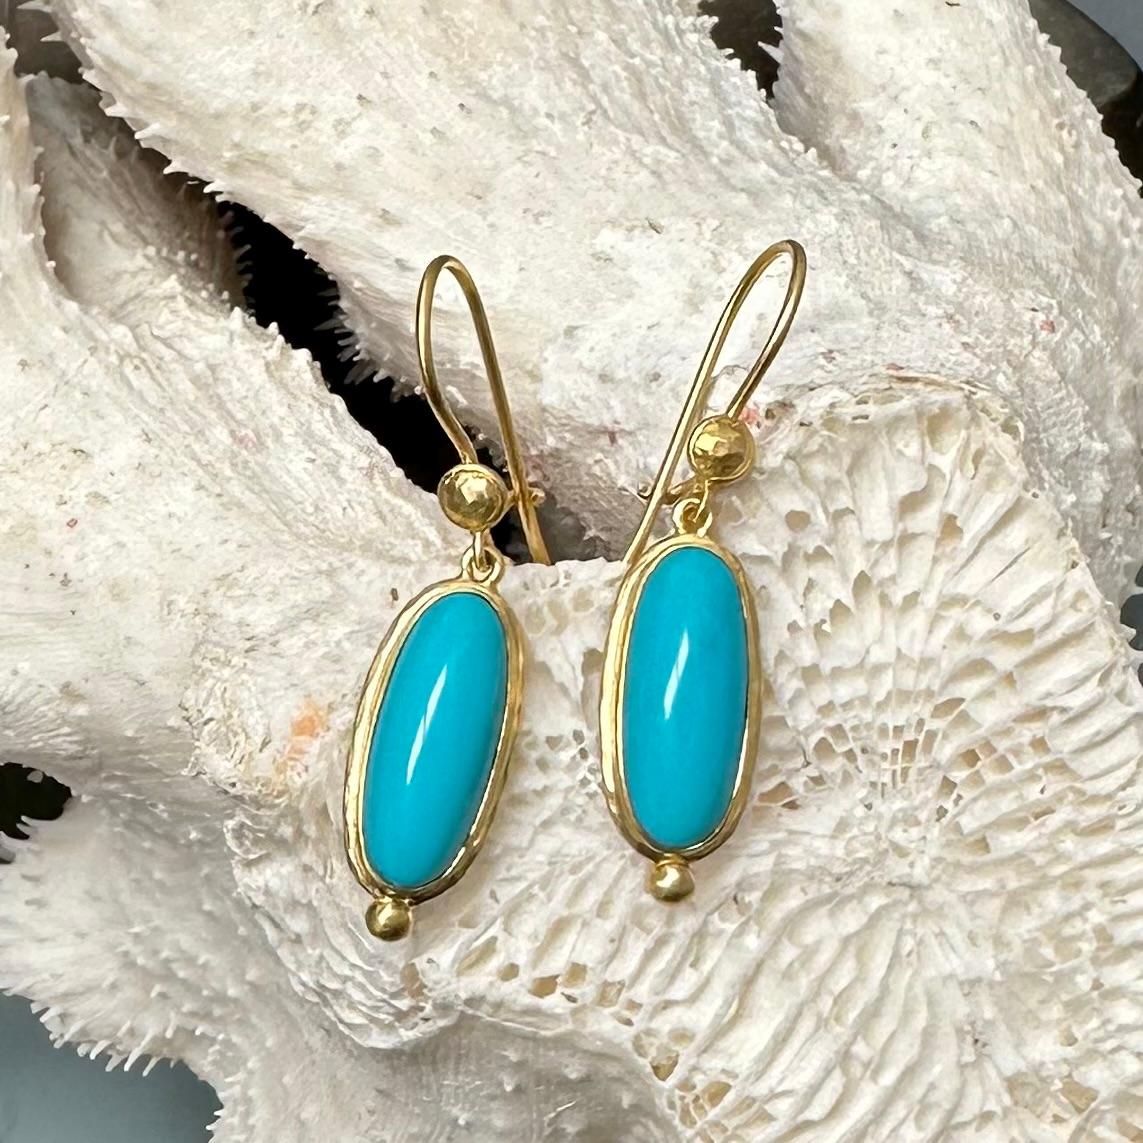 Two flawless long oval 7 x 17 mm cabochons of Arizona Sleeping Beauty mine turquoise are set in matte-finish hand hammered double bezels suspended below safety clasp 18K gold wires beneath circular discs with complementary large 